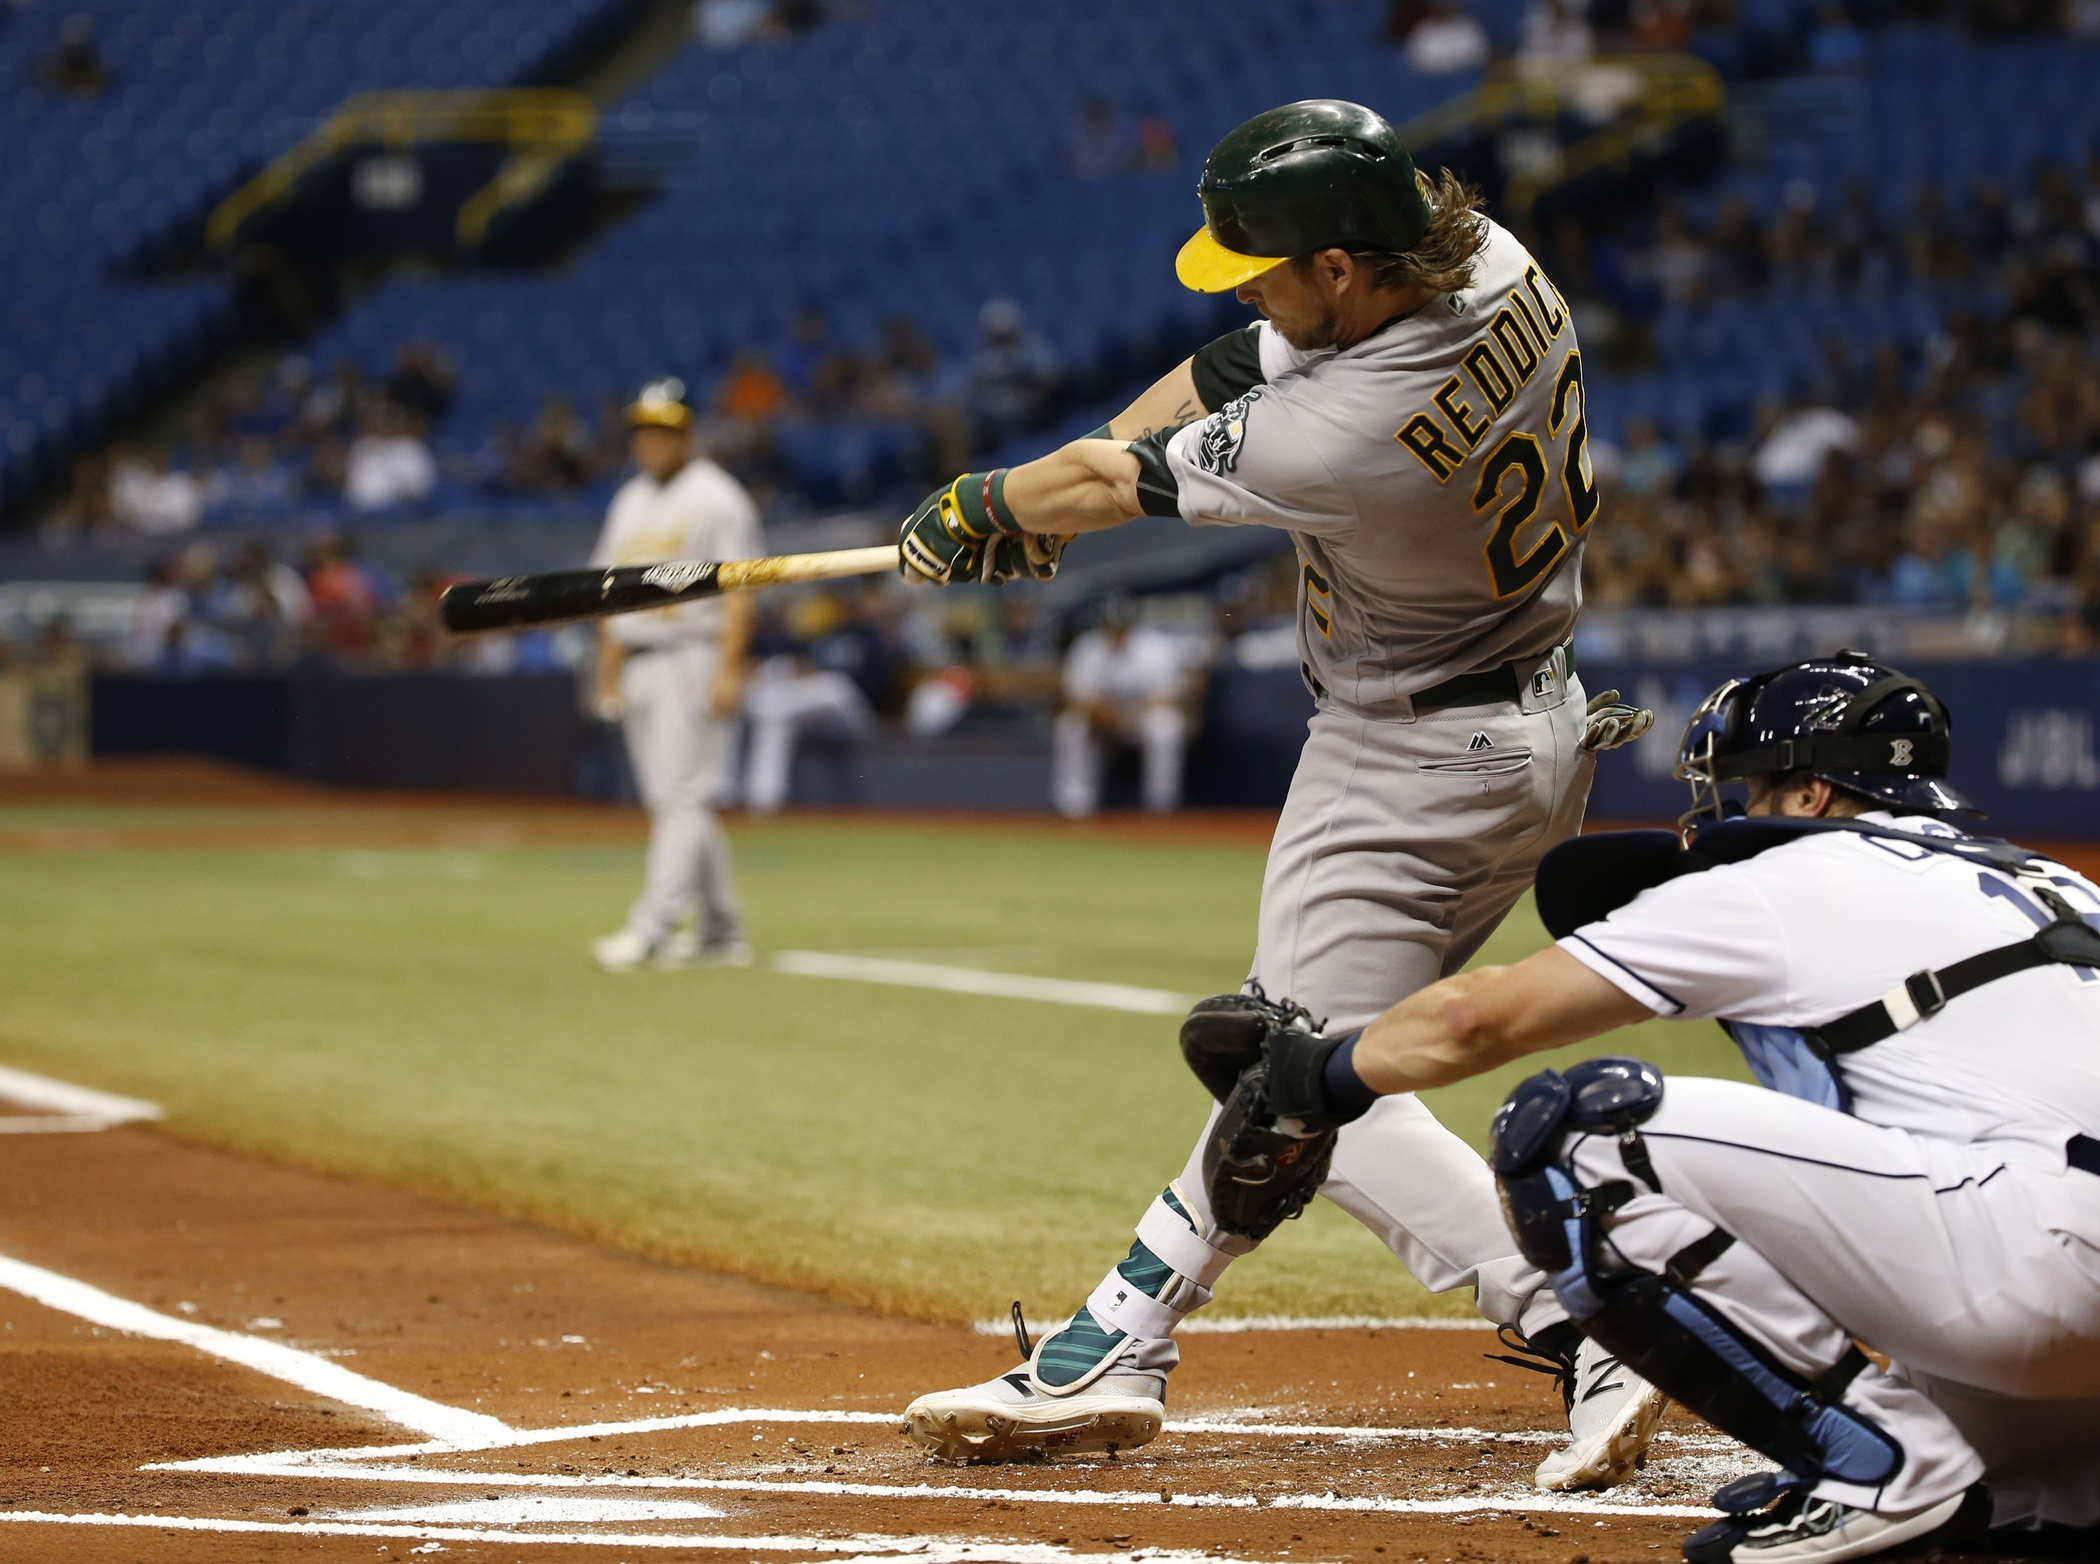 May 13, 2016; St. Petersburg, FL, USA; Oakland Athletics right fielder Josh Reddick (22) singles during the first inning against the Tampa Bay Rays at Tropicana Field. Mandatory Credit: Kim Klement-USA TODAY Sports 